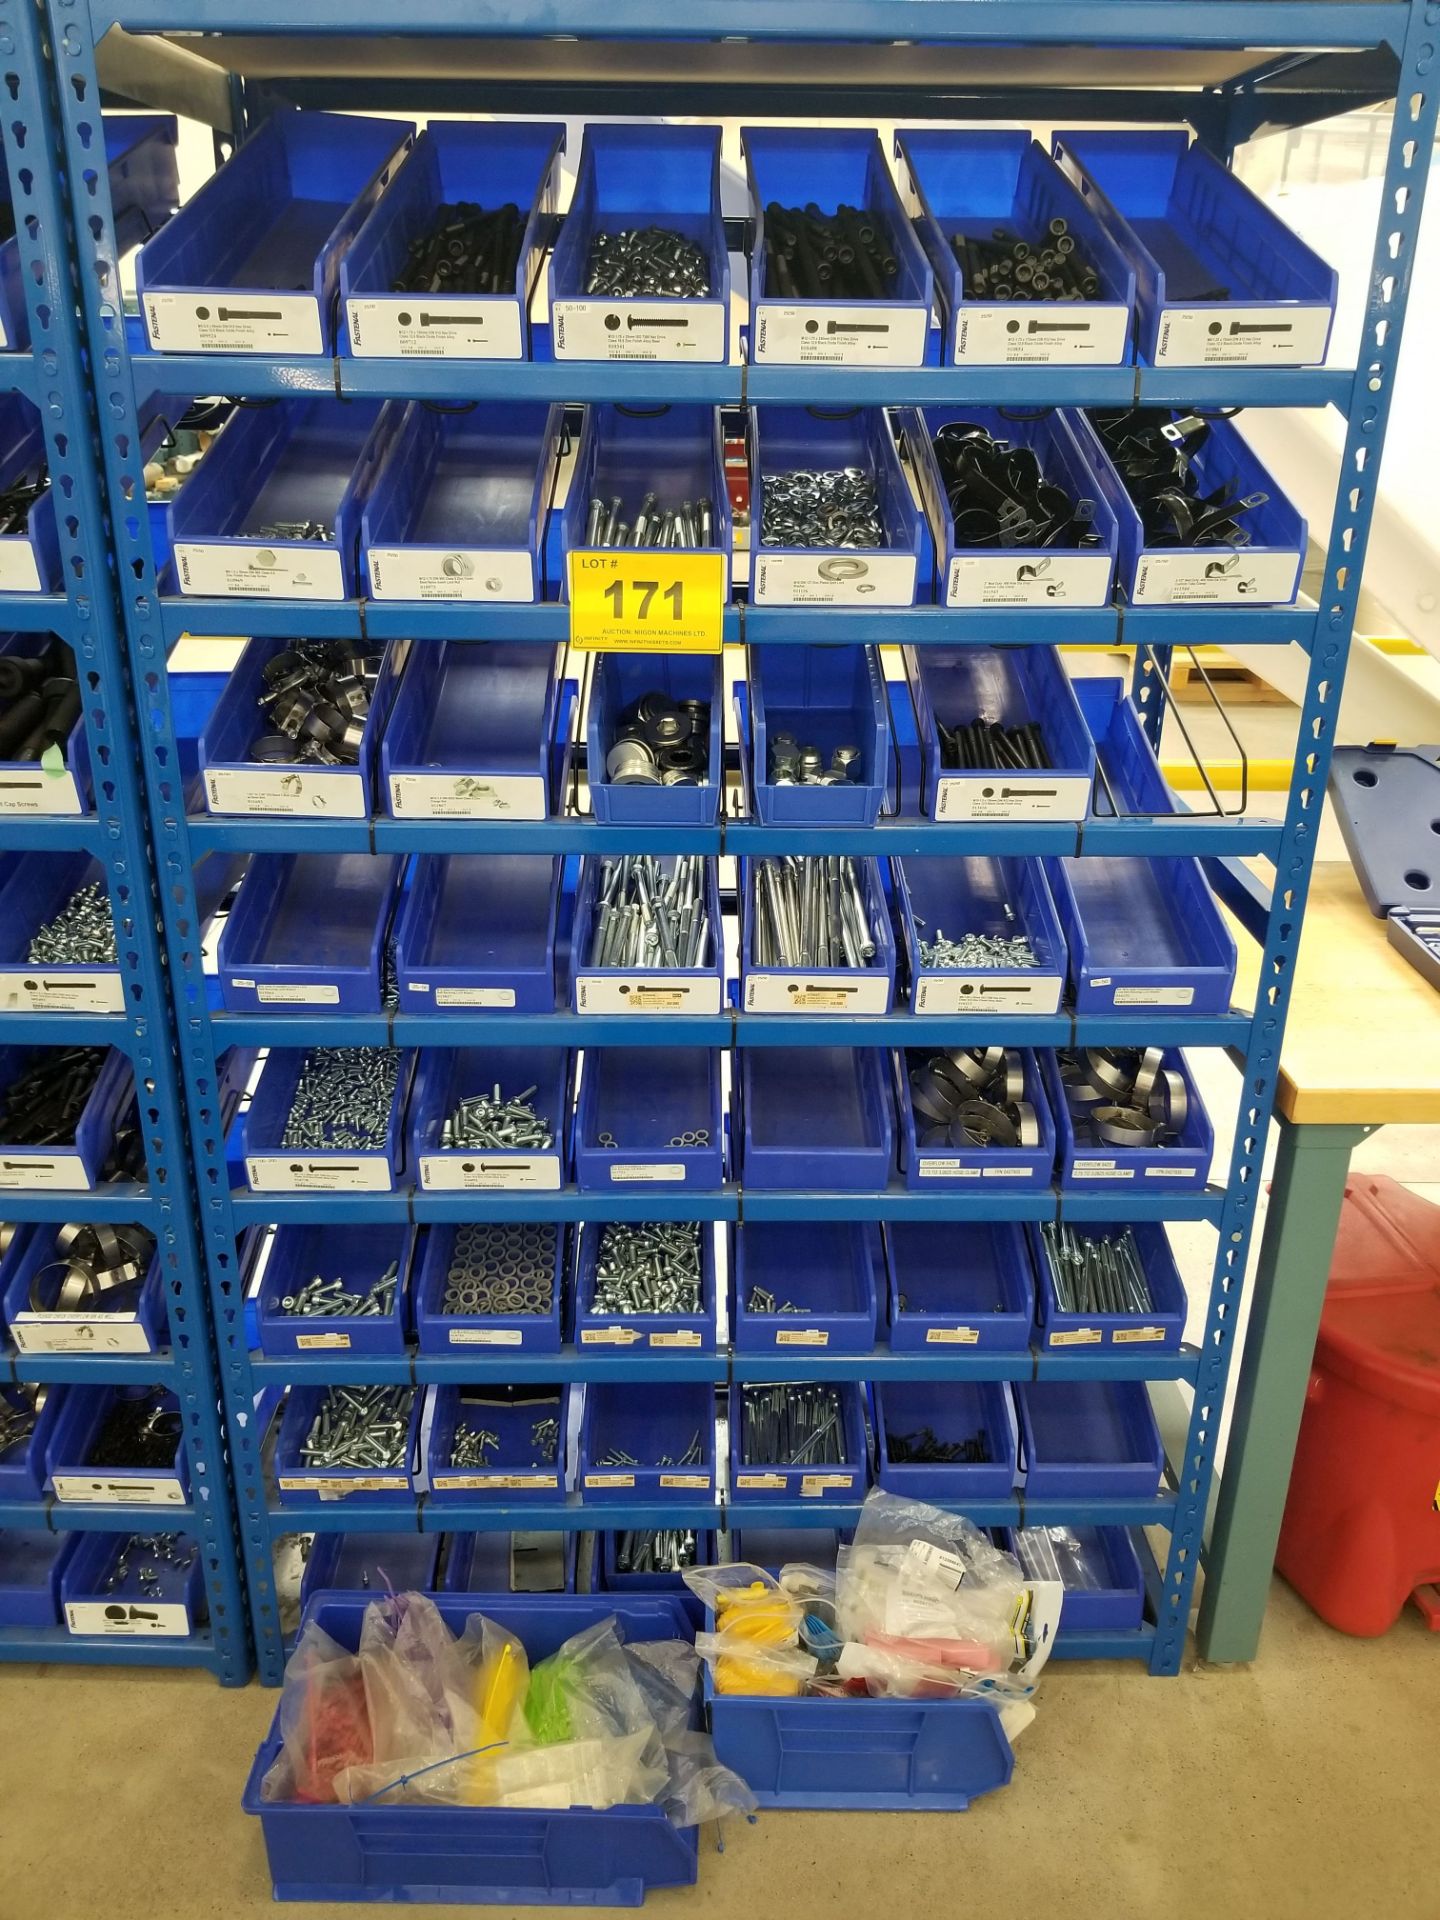 LOT - FASTENAL HARDWARE CONTENTS - COMES WITH RACK AND BINS